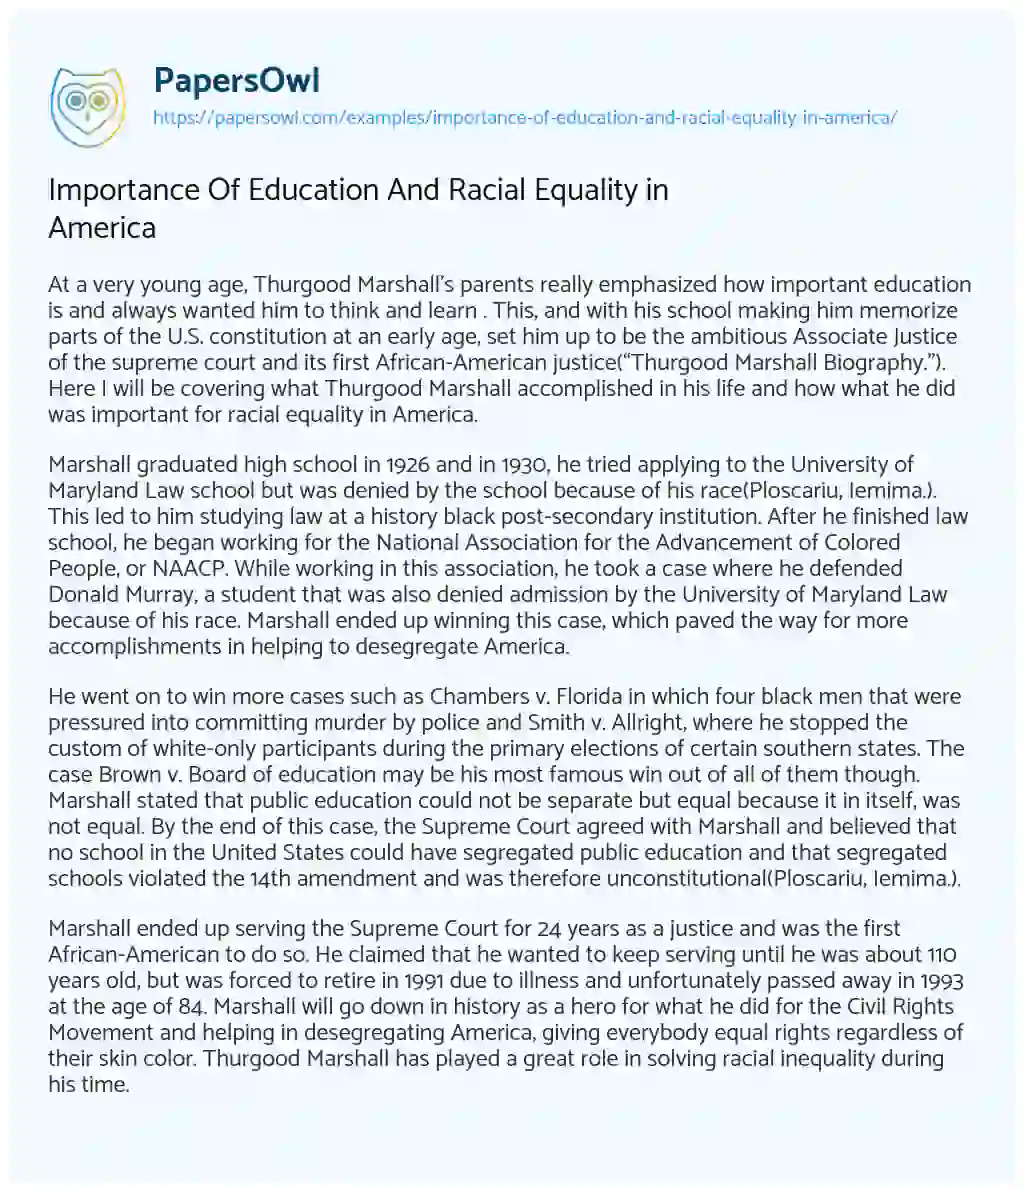 Essay on Importance of Education and Racial Equality in America